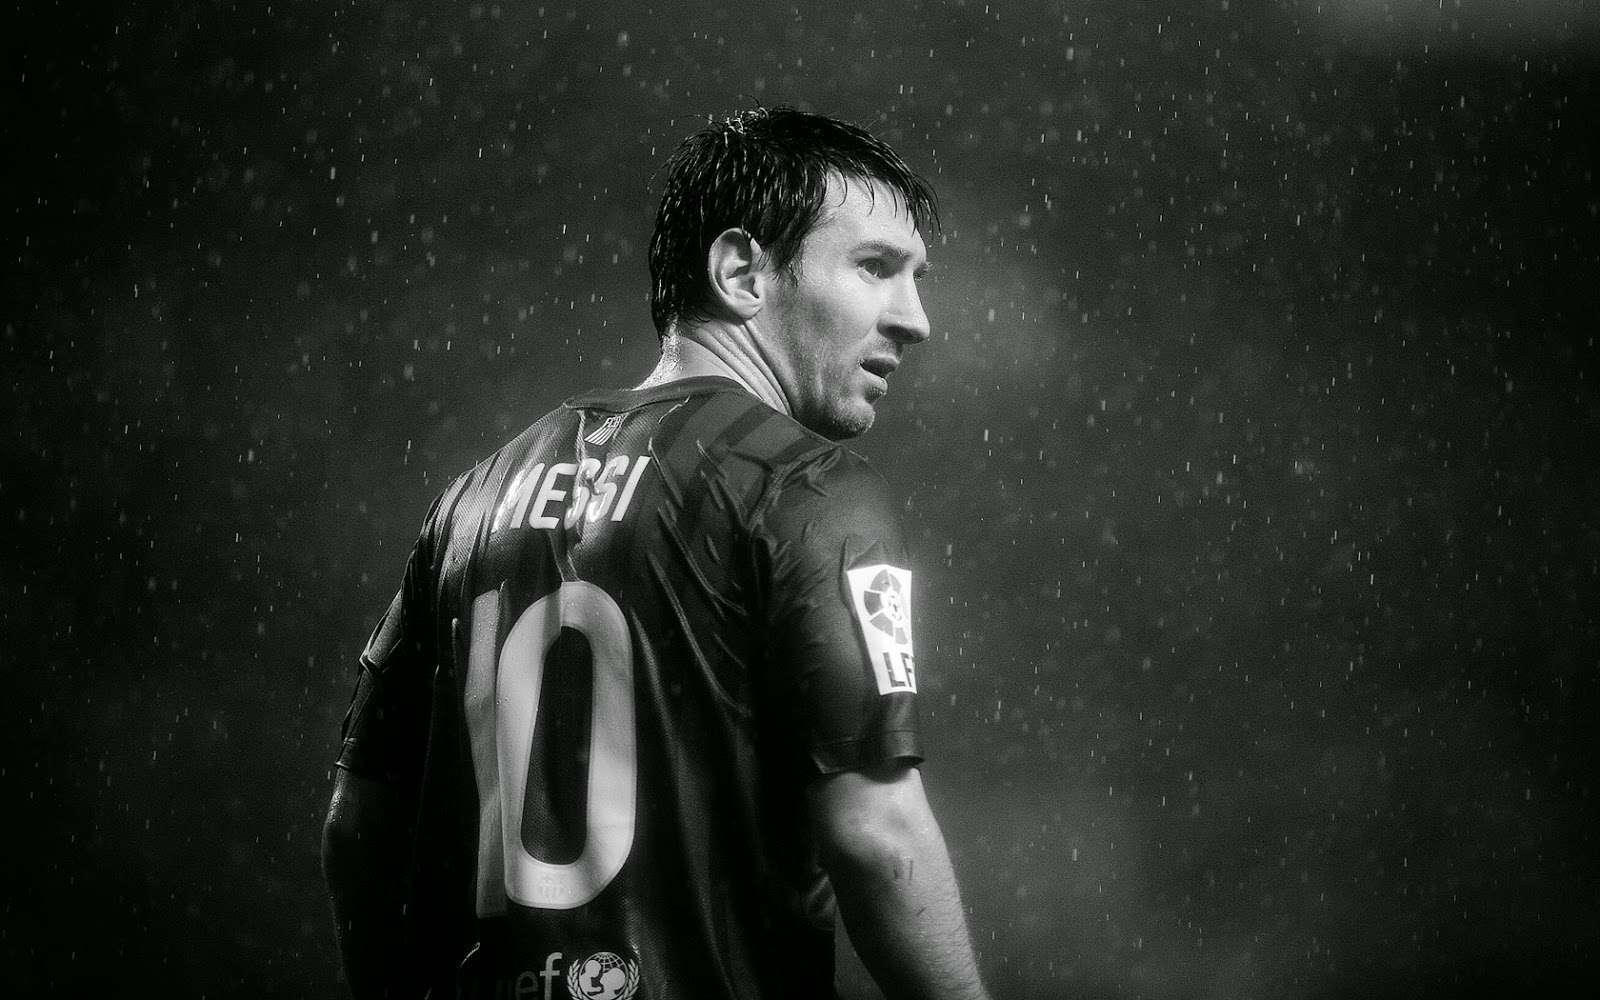 Download Free 50 Lionel Messi HD Images and Wallpapers